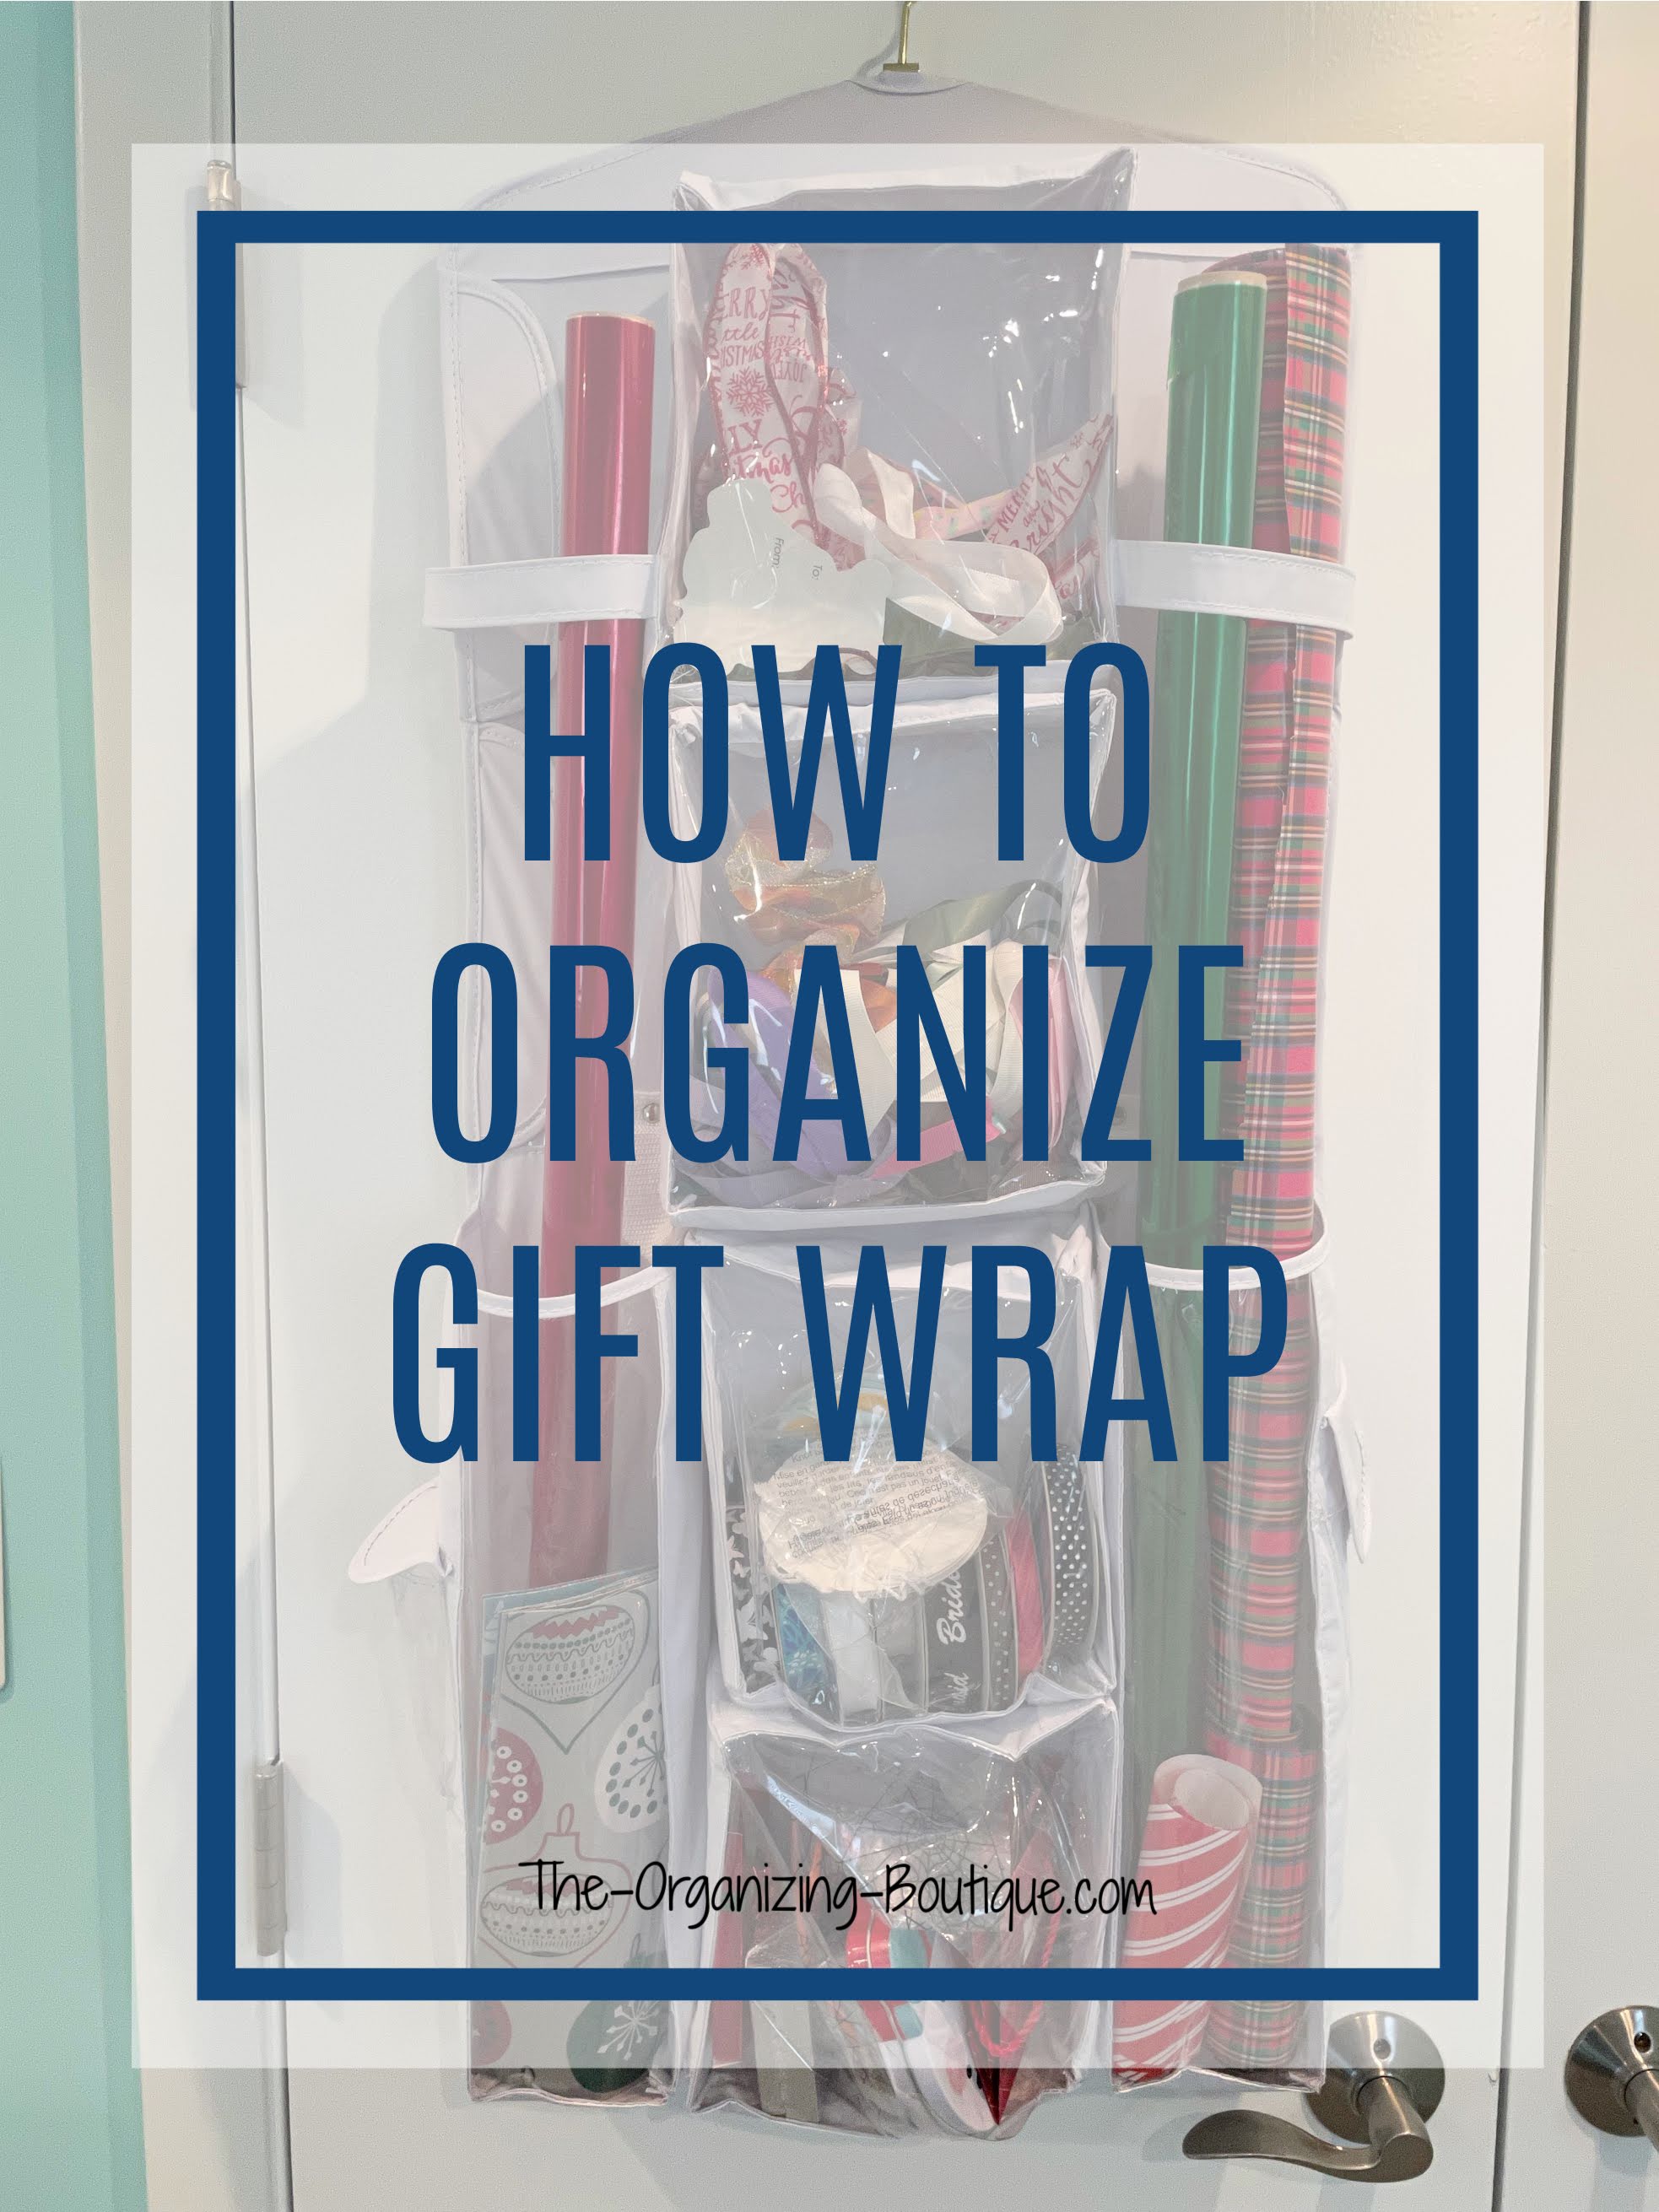 Looking for a wrapping paper organizer or wrapping paper storage ideas? Here's the exact organizing process and my top product suggestions. Enjoy!